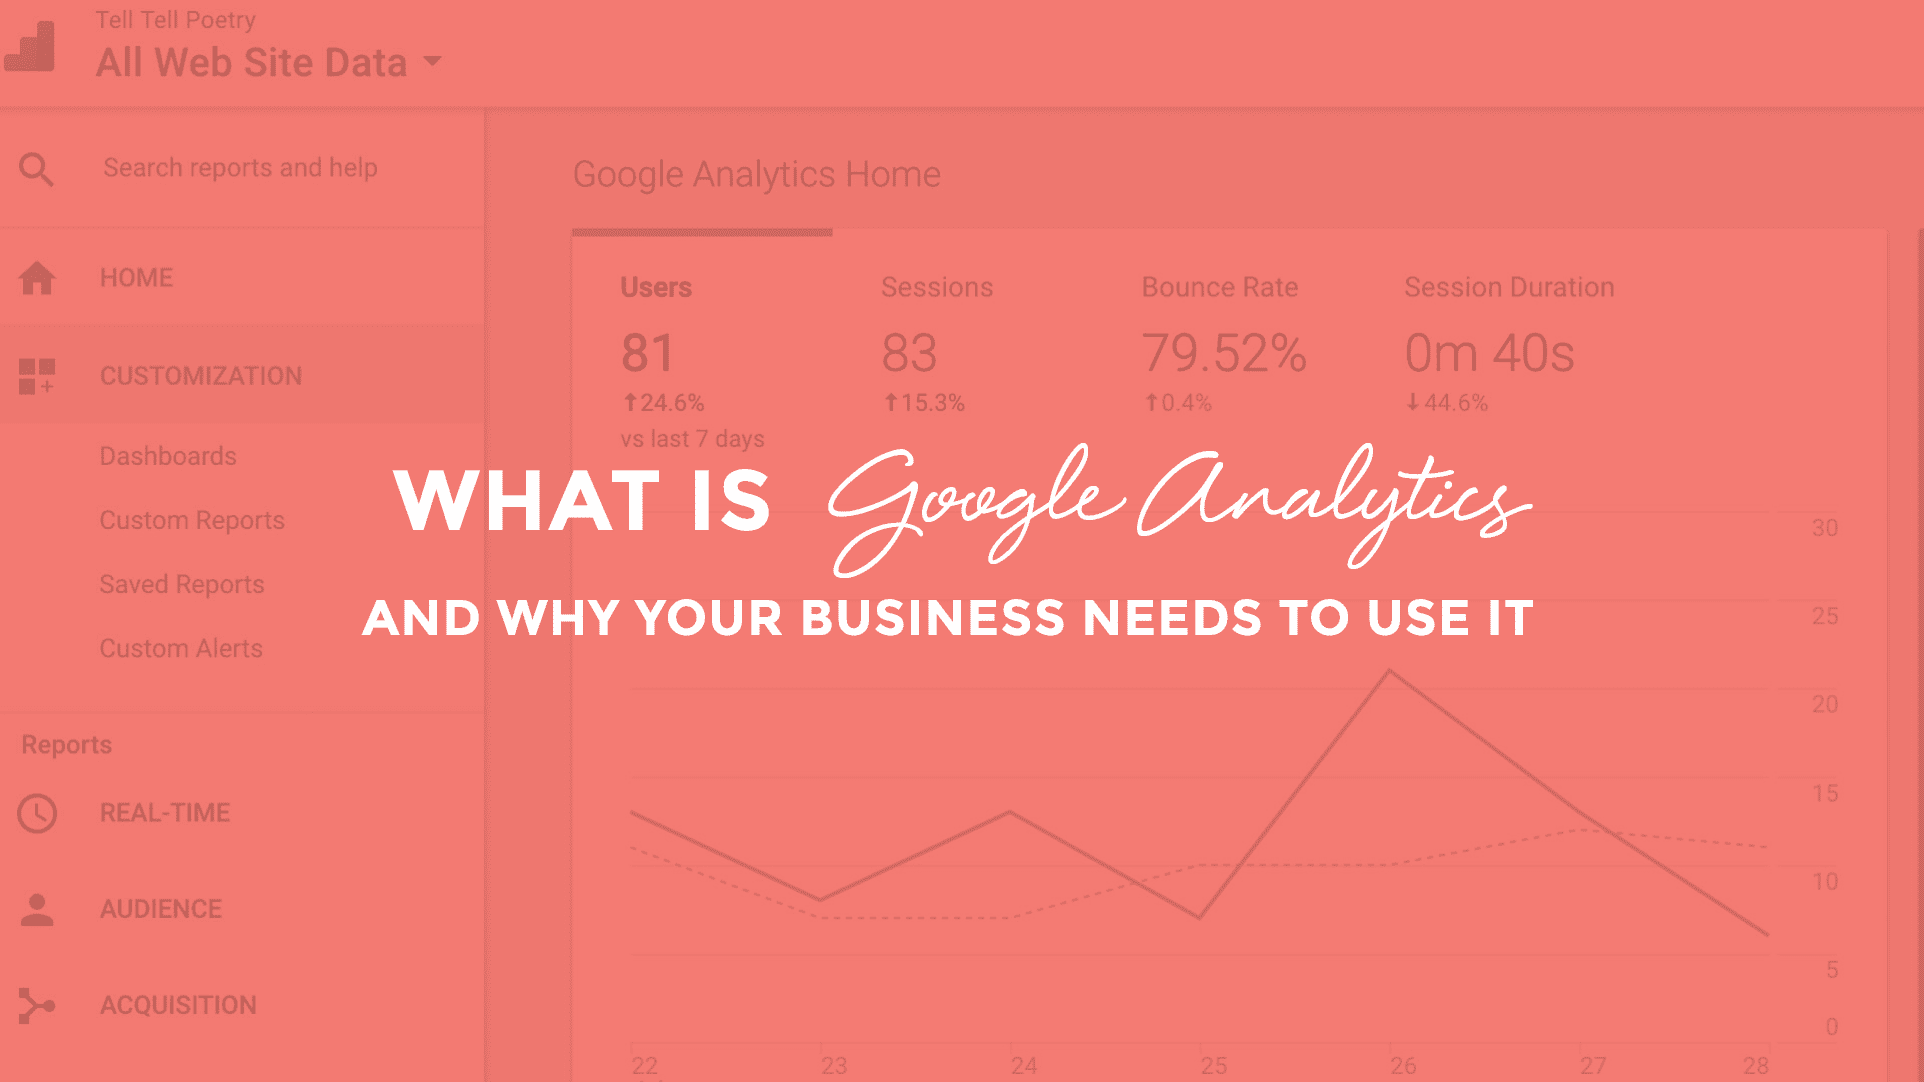 What is Google Analytics and why your business needs to use it